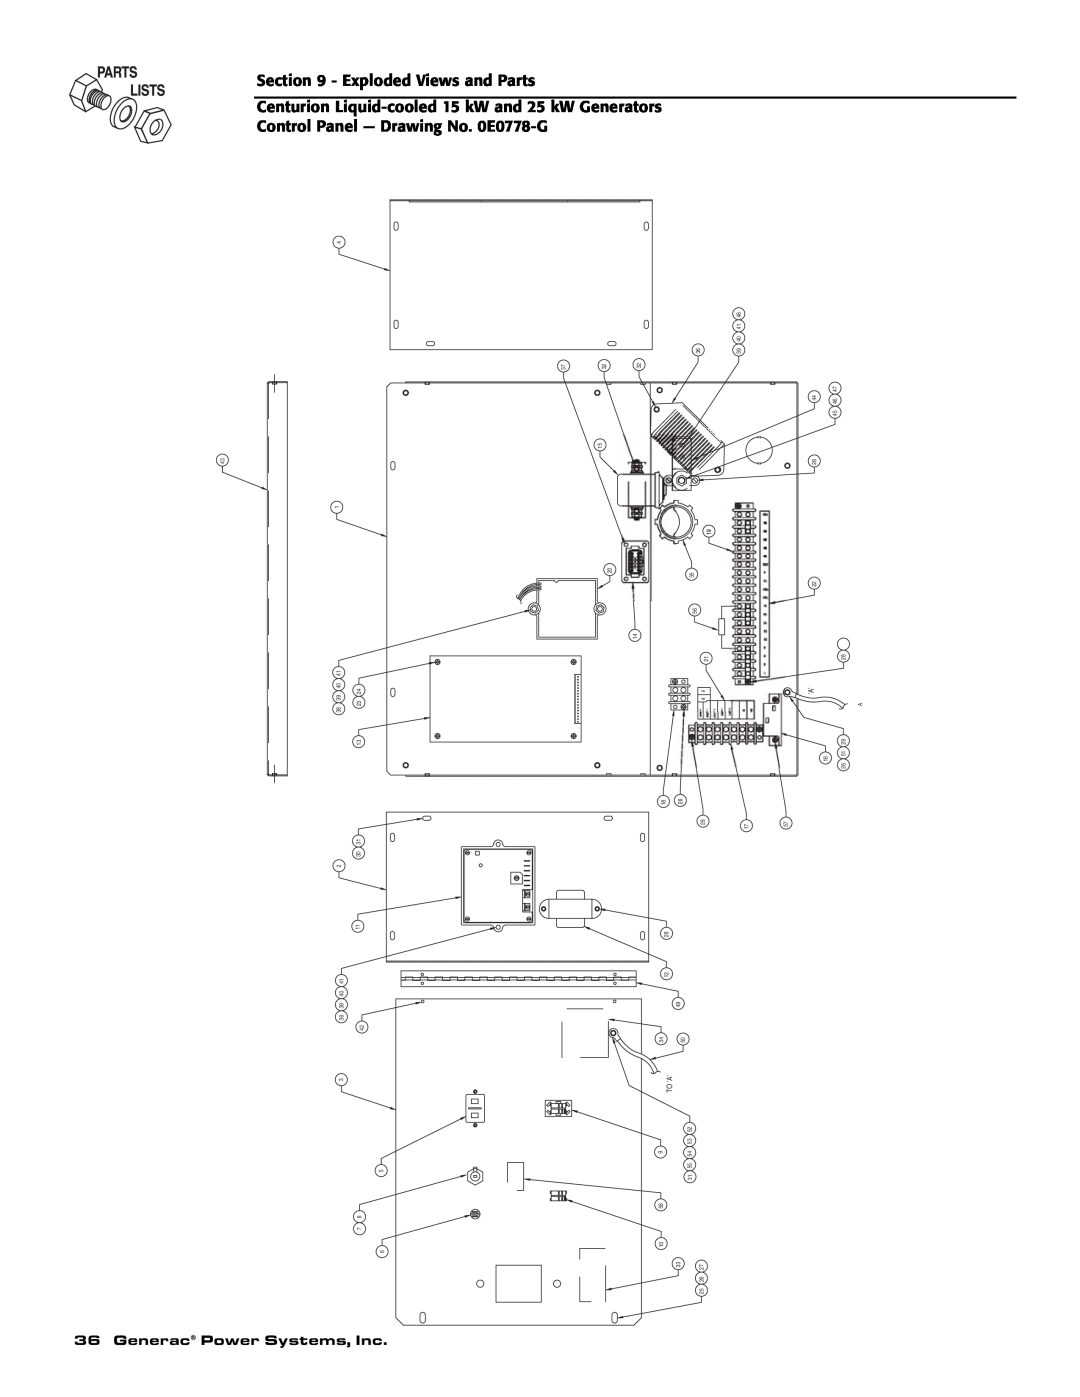 Generac 004912-0, 004912-1, 004913-0, 004913-1 owner manual Exploded Views and Parts, Generac Power Systems, Inc 